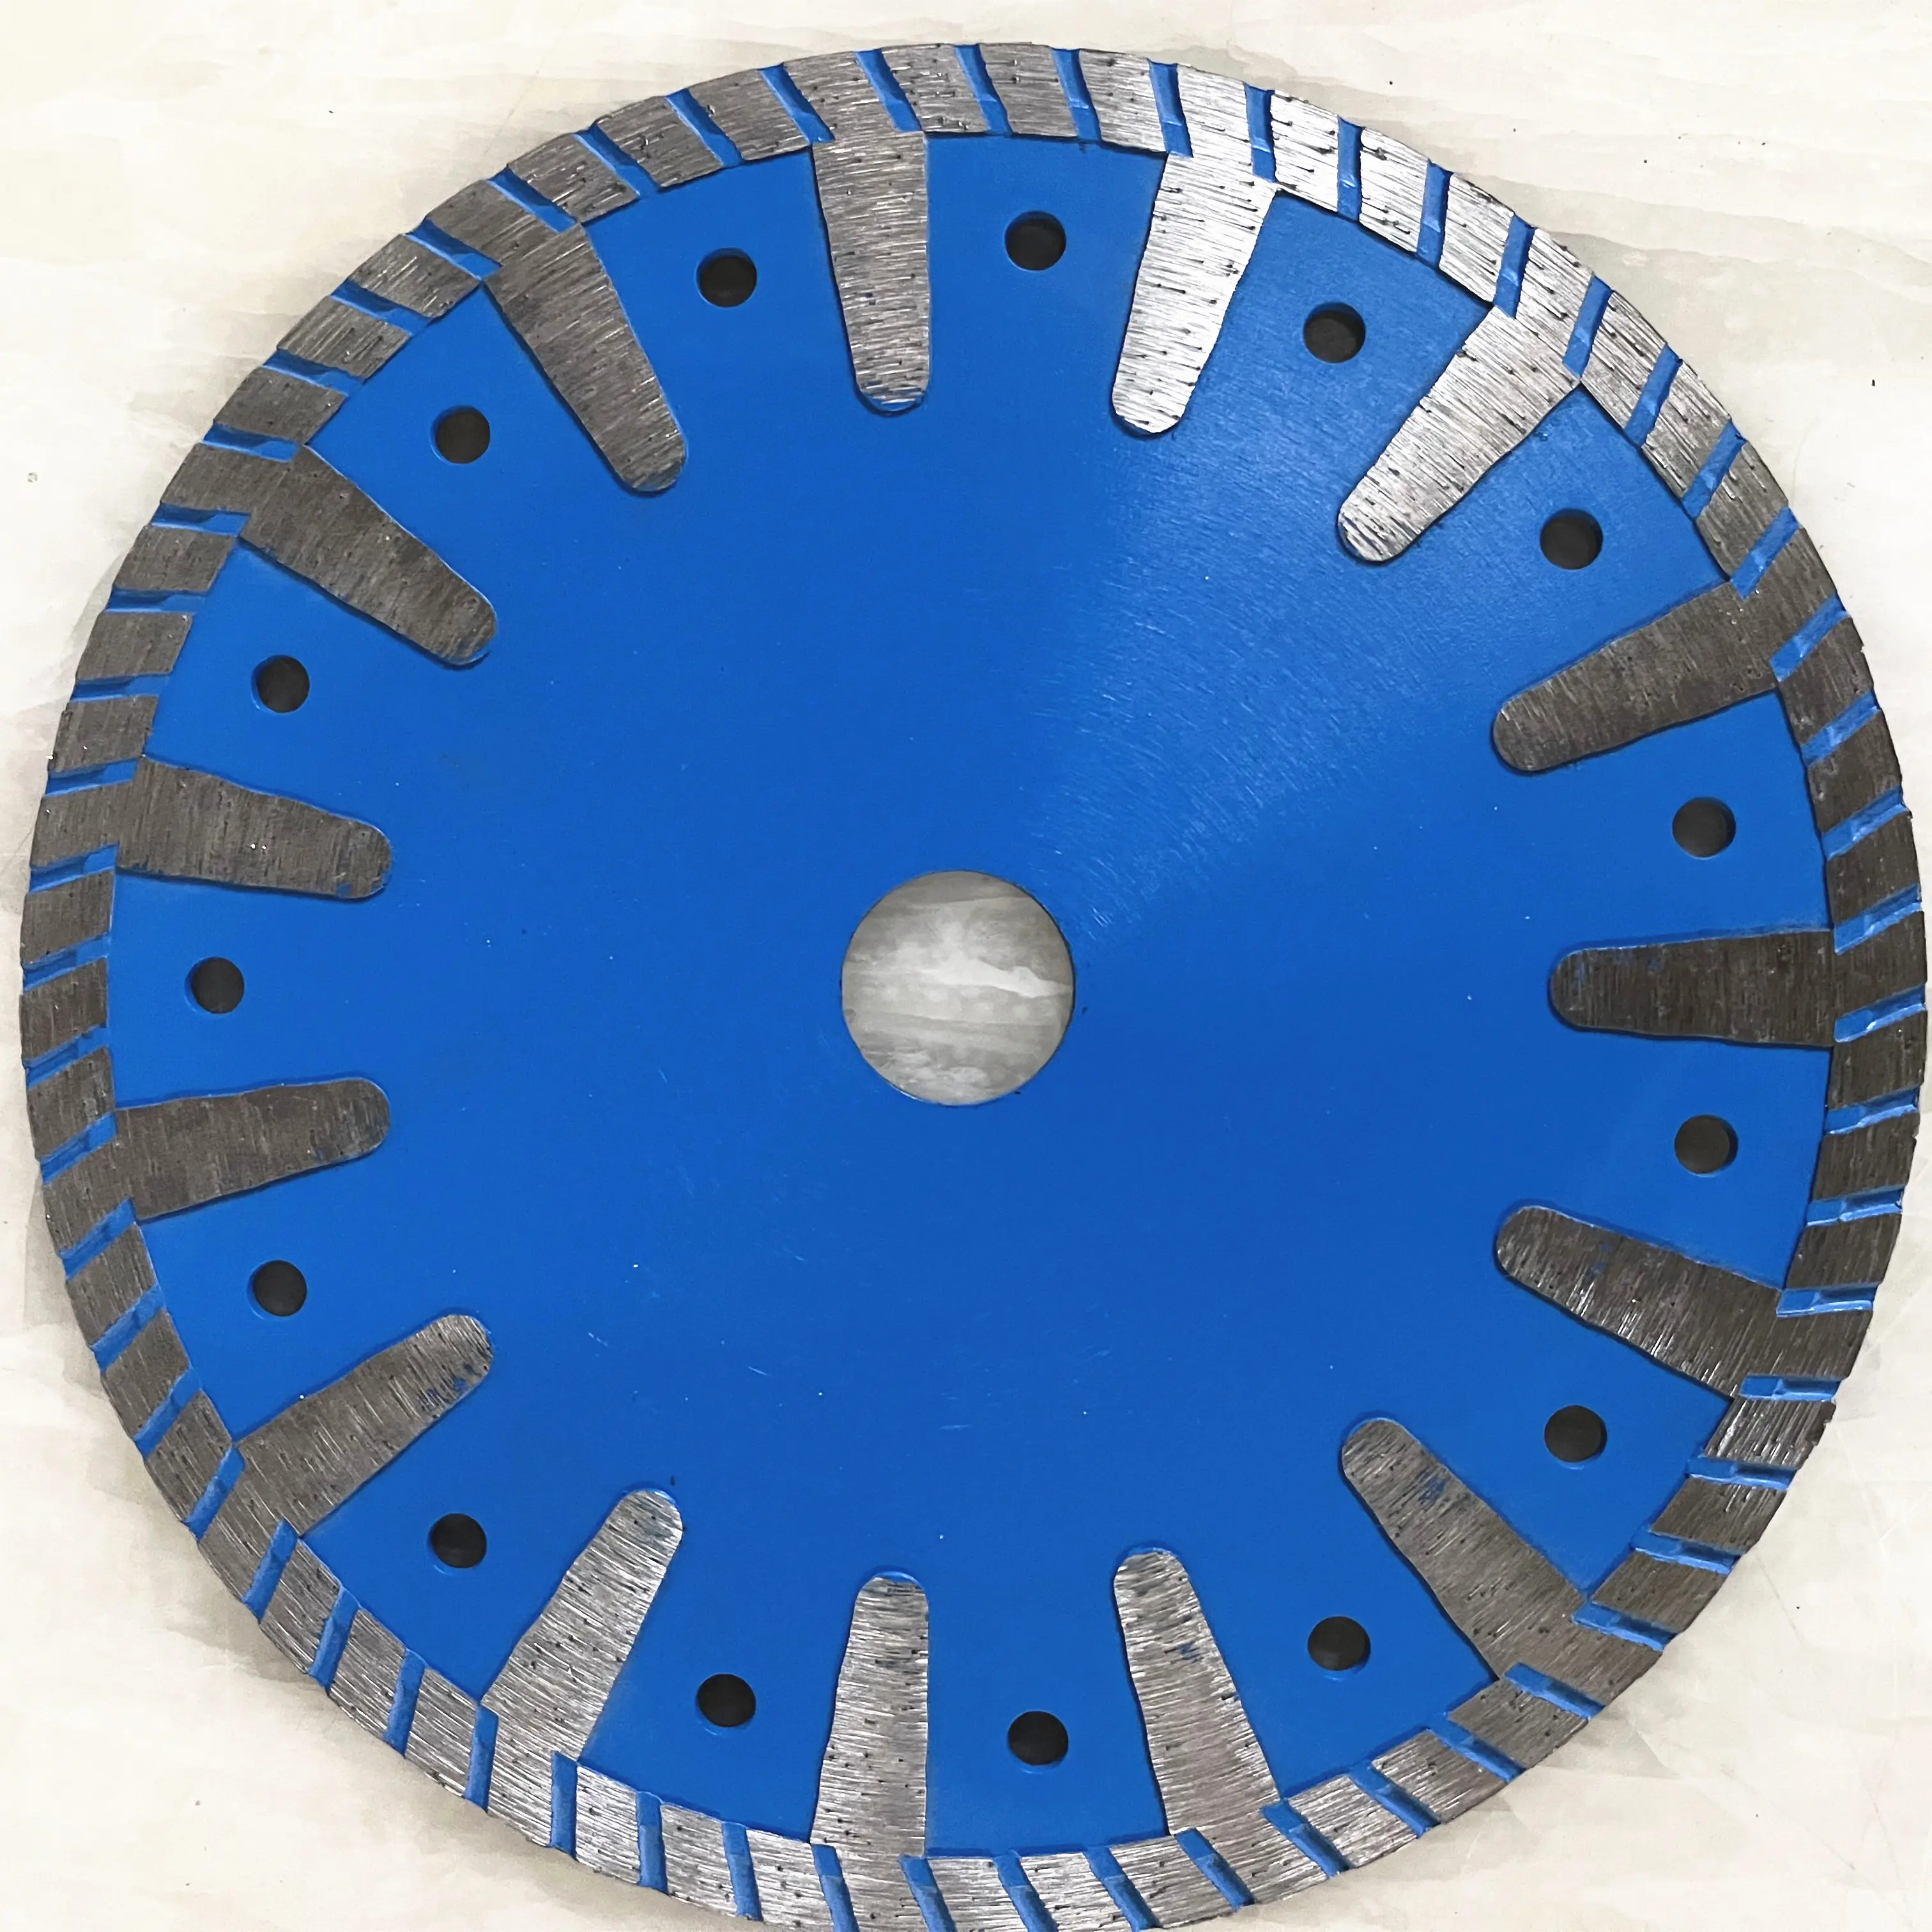 180 mm Egypt Popular T Type Style Diamond Grit Circular Saw Blade for Dry Cutting Stone, Concrete, Granite